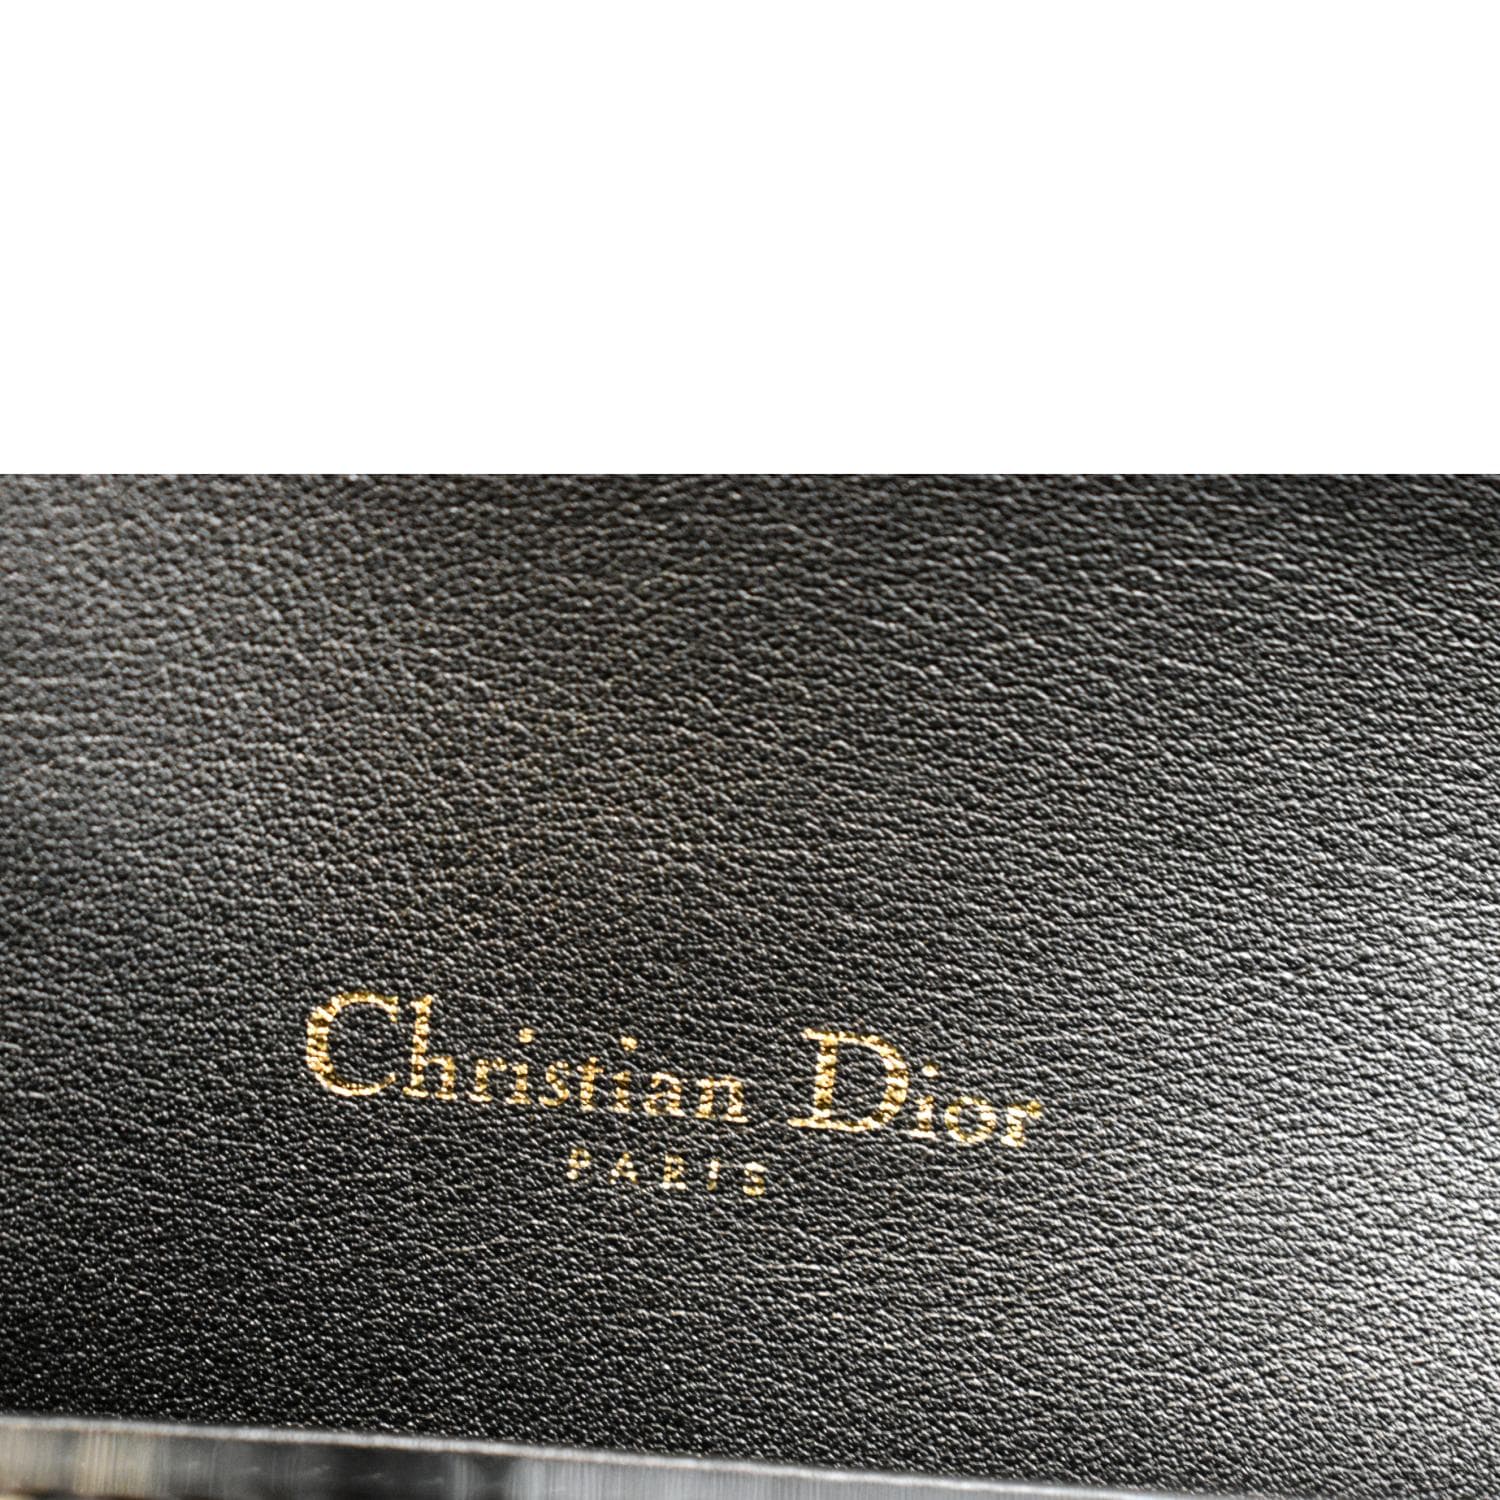 Christian Dior Lady dior Chain Pouch Shoulder Bag Leather Black